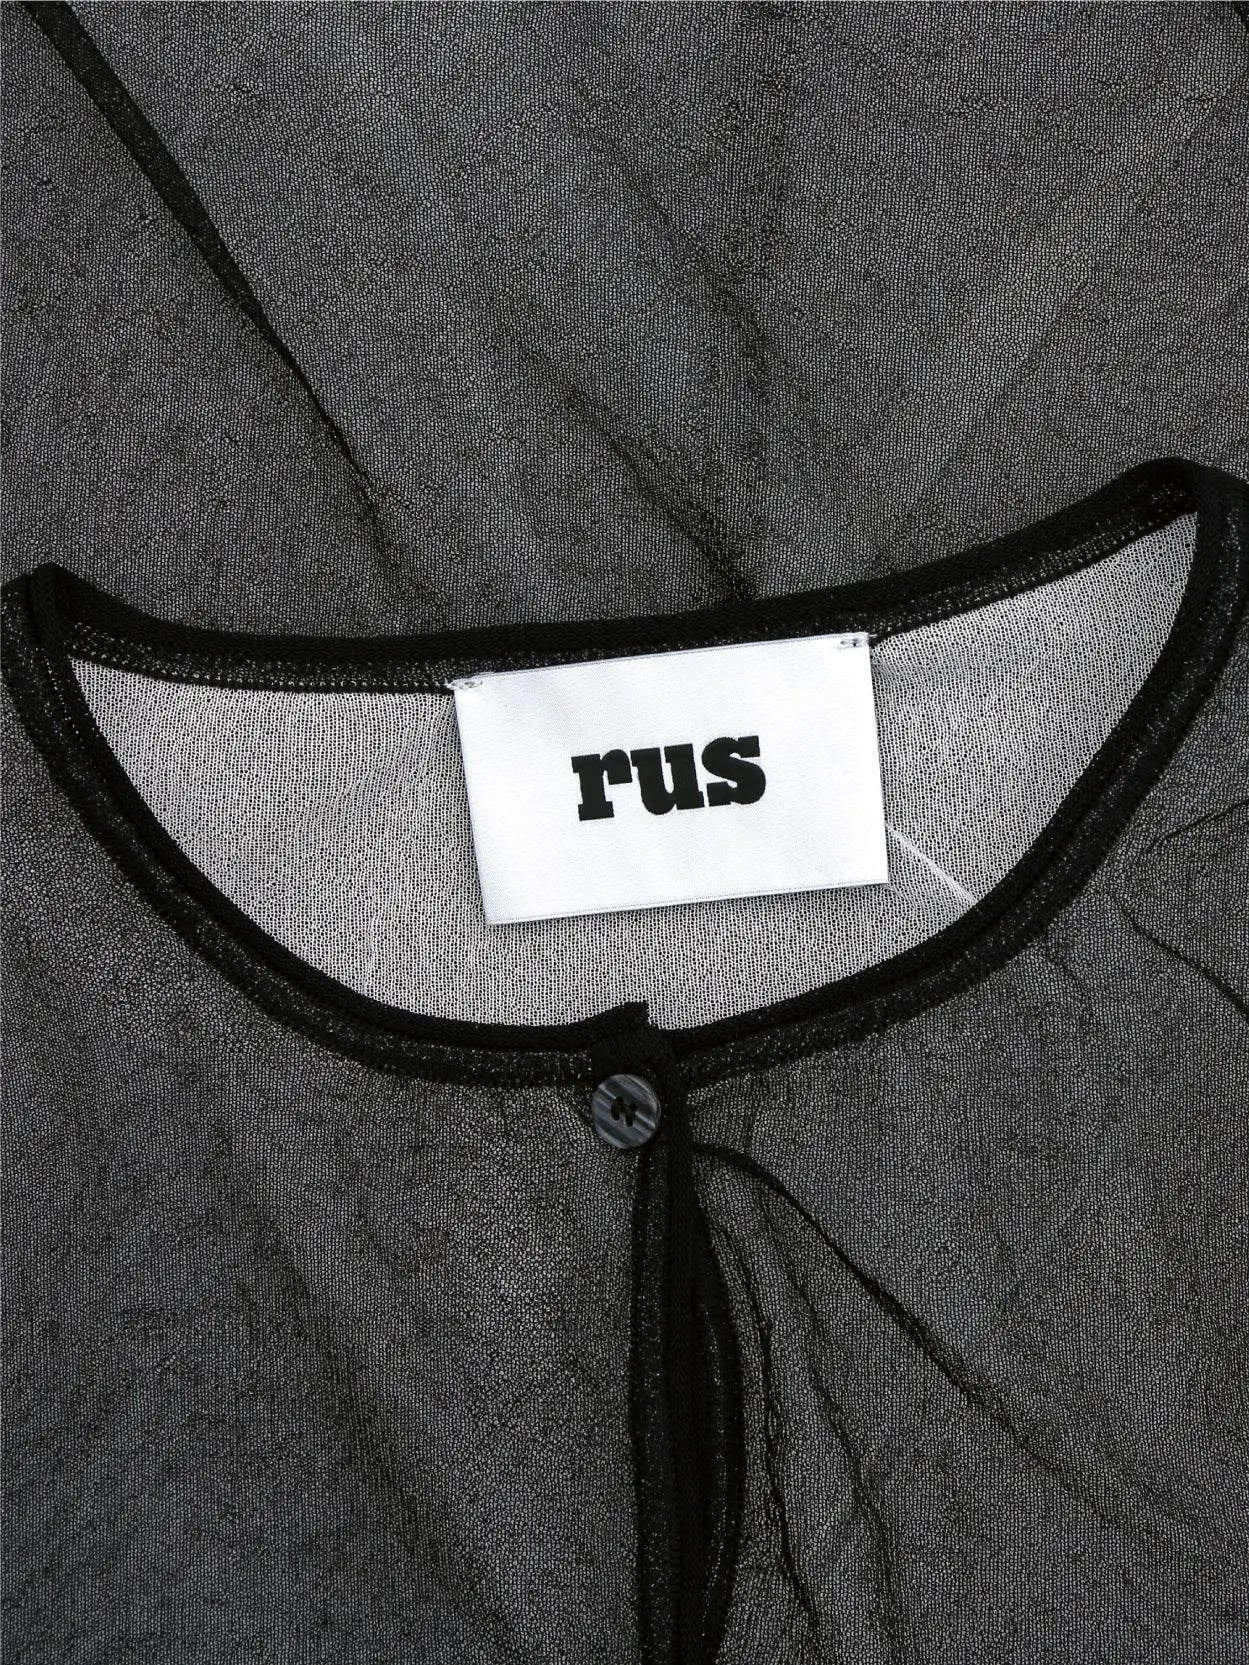 A long-sleeved, sheer black Garasu Cardigan Black with a button-up front and a round neckline by Rus. The fabric appears slightly crinkled. Discover this elegant piece at Bassalstore, your go-to fashion store in Barcelona. The label inside the cardigan reads 'FIL.'.